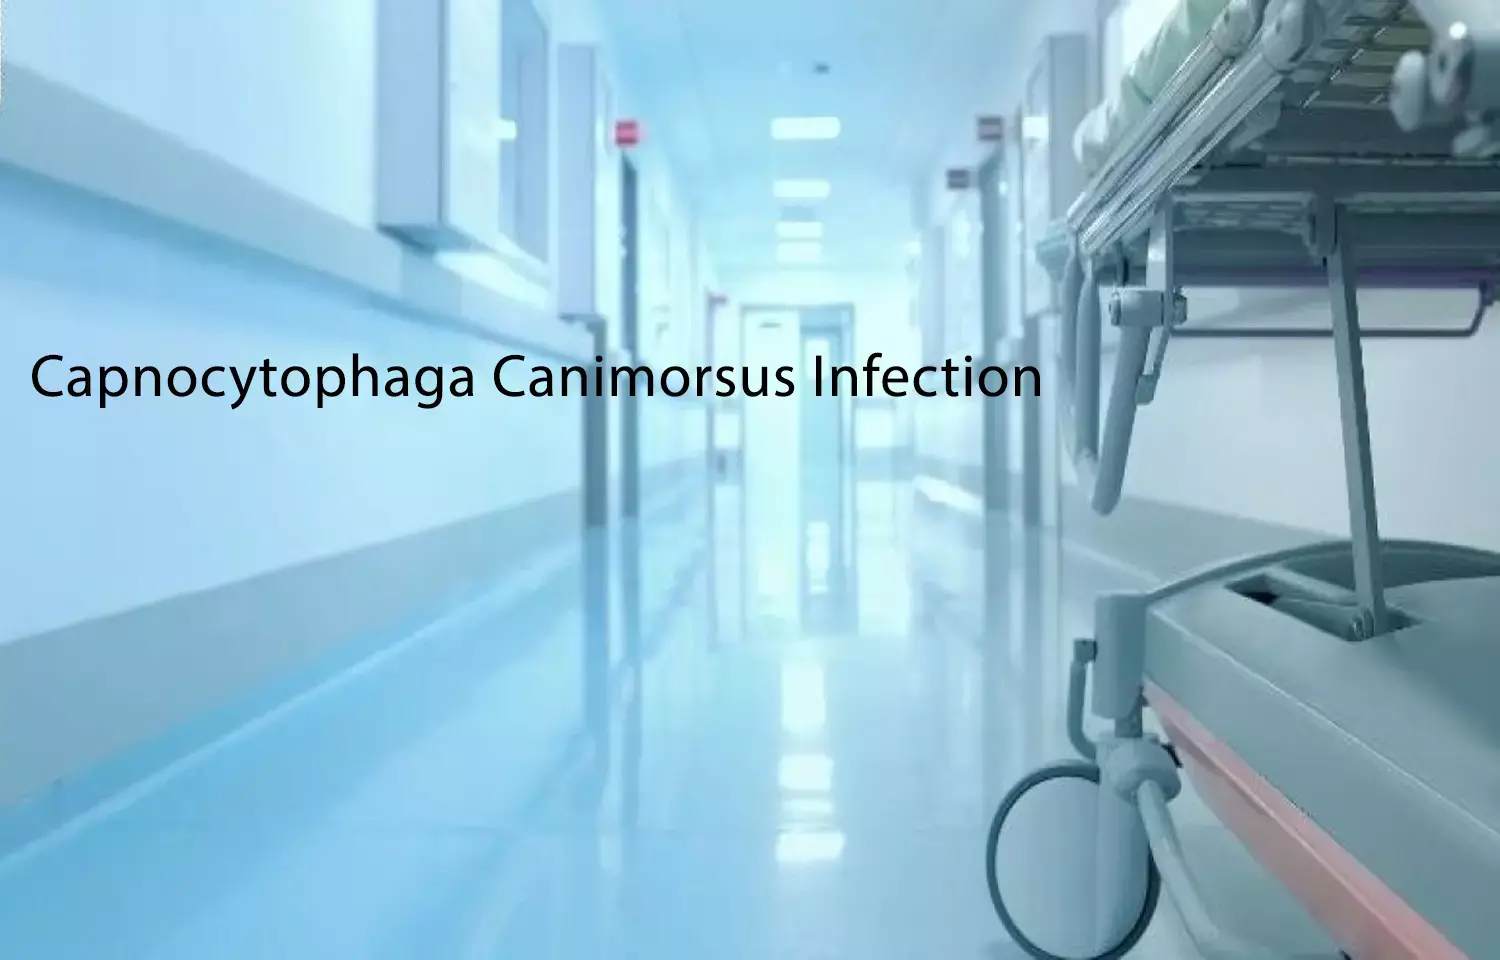 Case of Capnocytophaga canimorsus Infection reported in NEJM